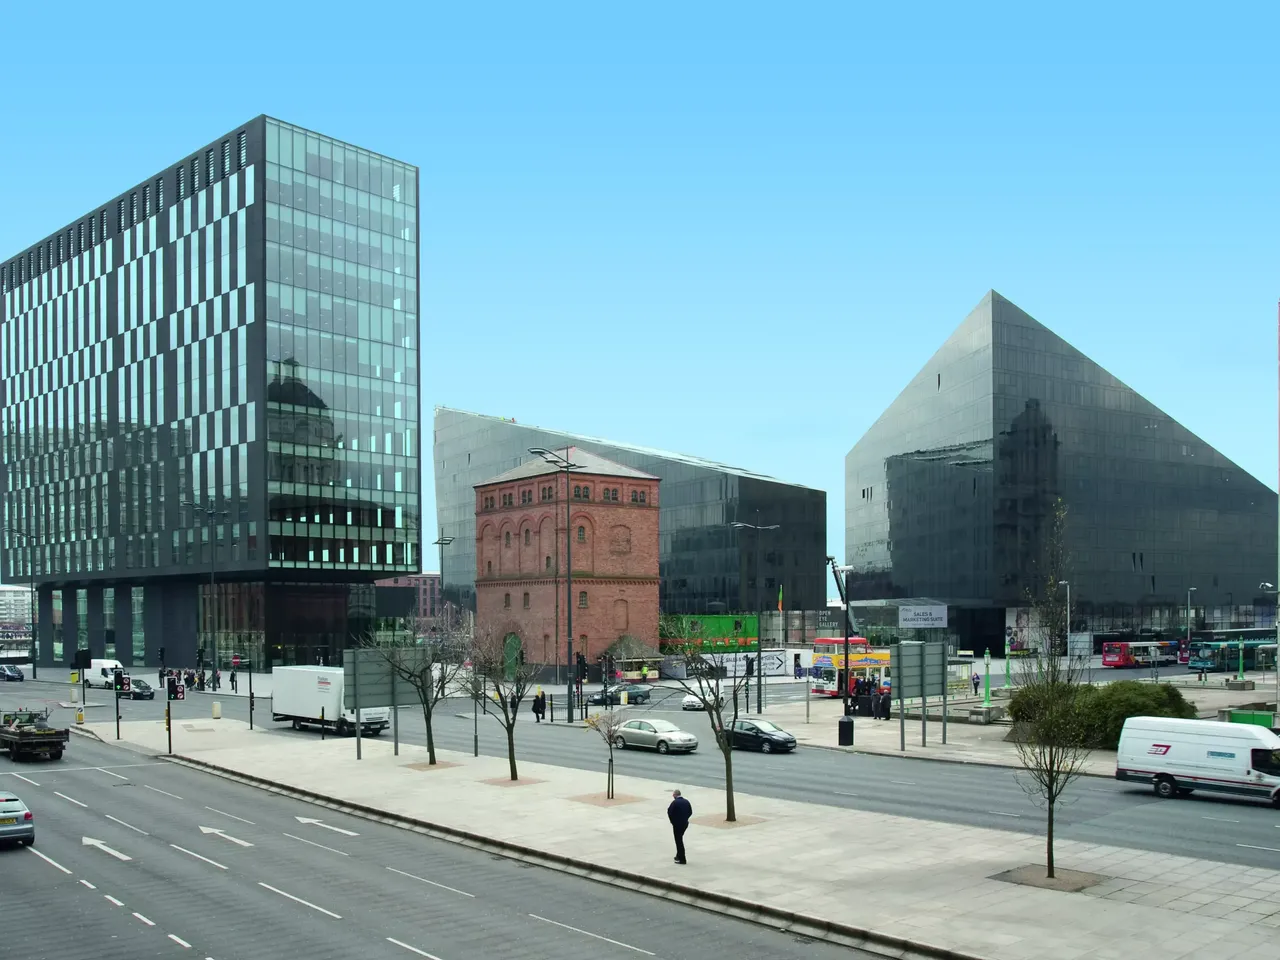 commerzreal-hausinvest-office-mann-island-liverpool-we265-01